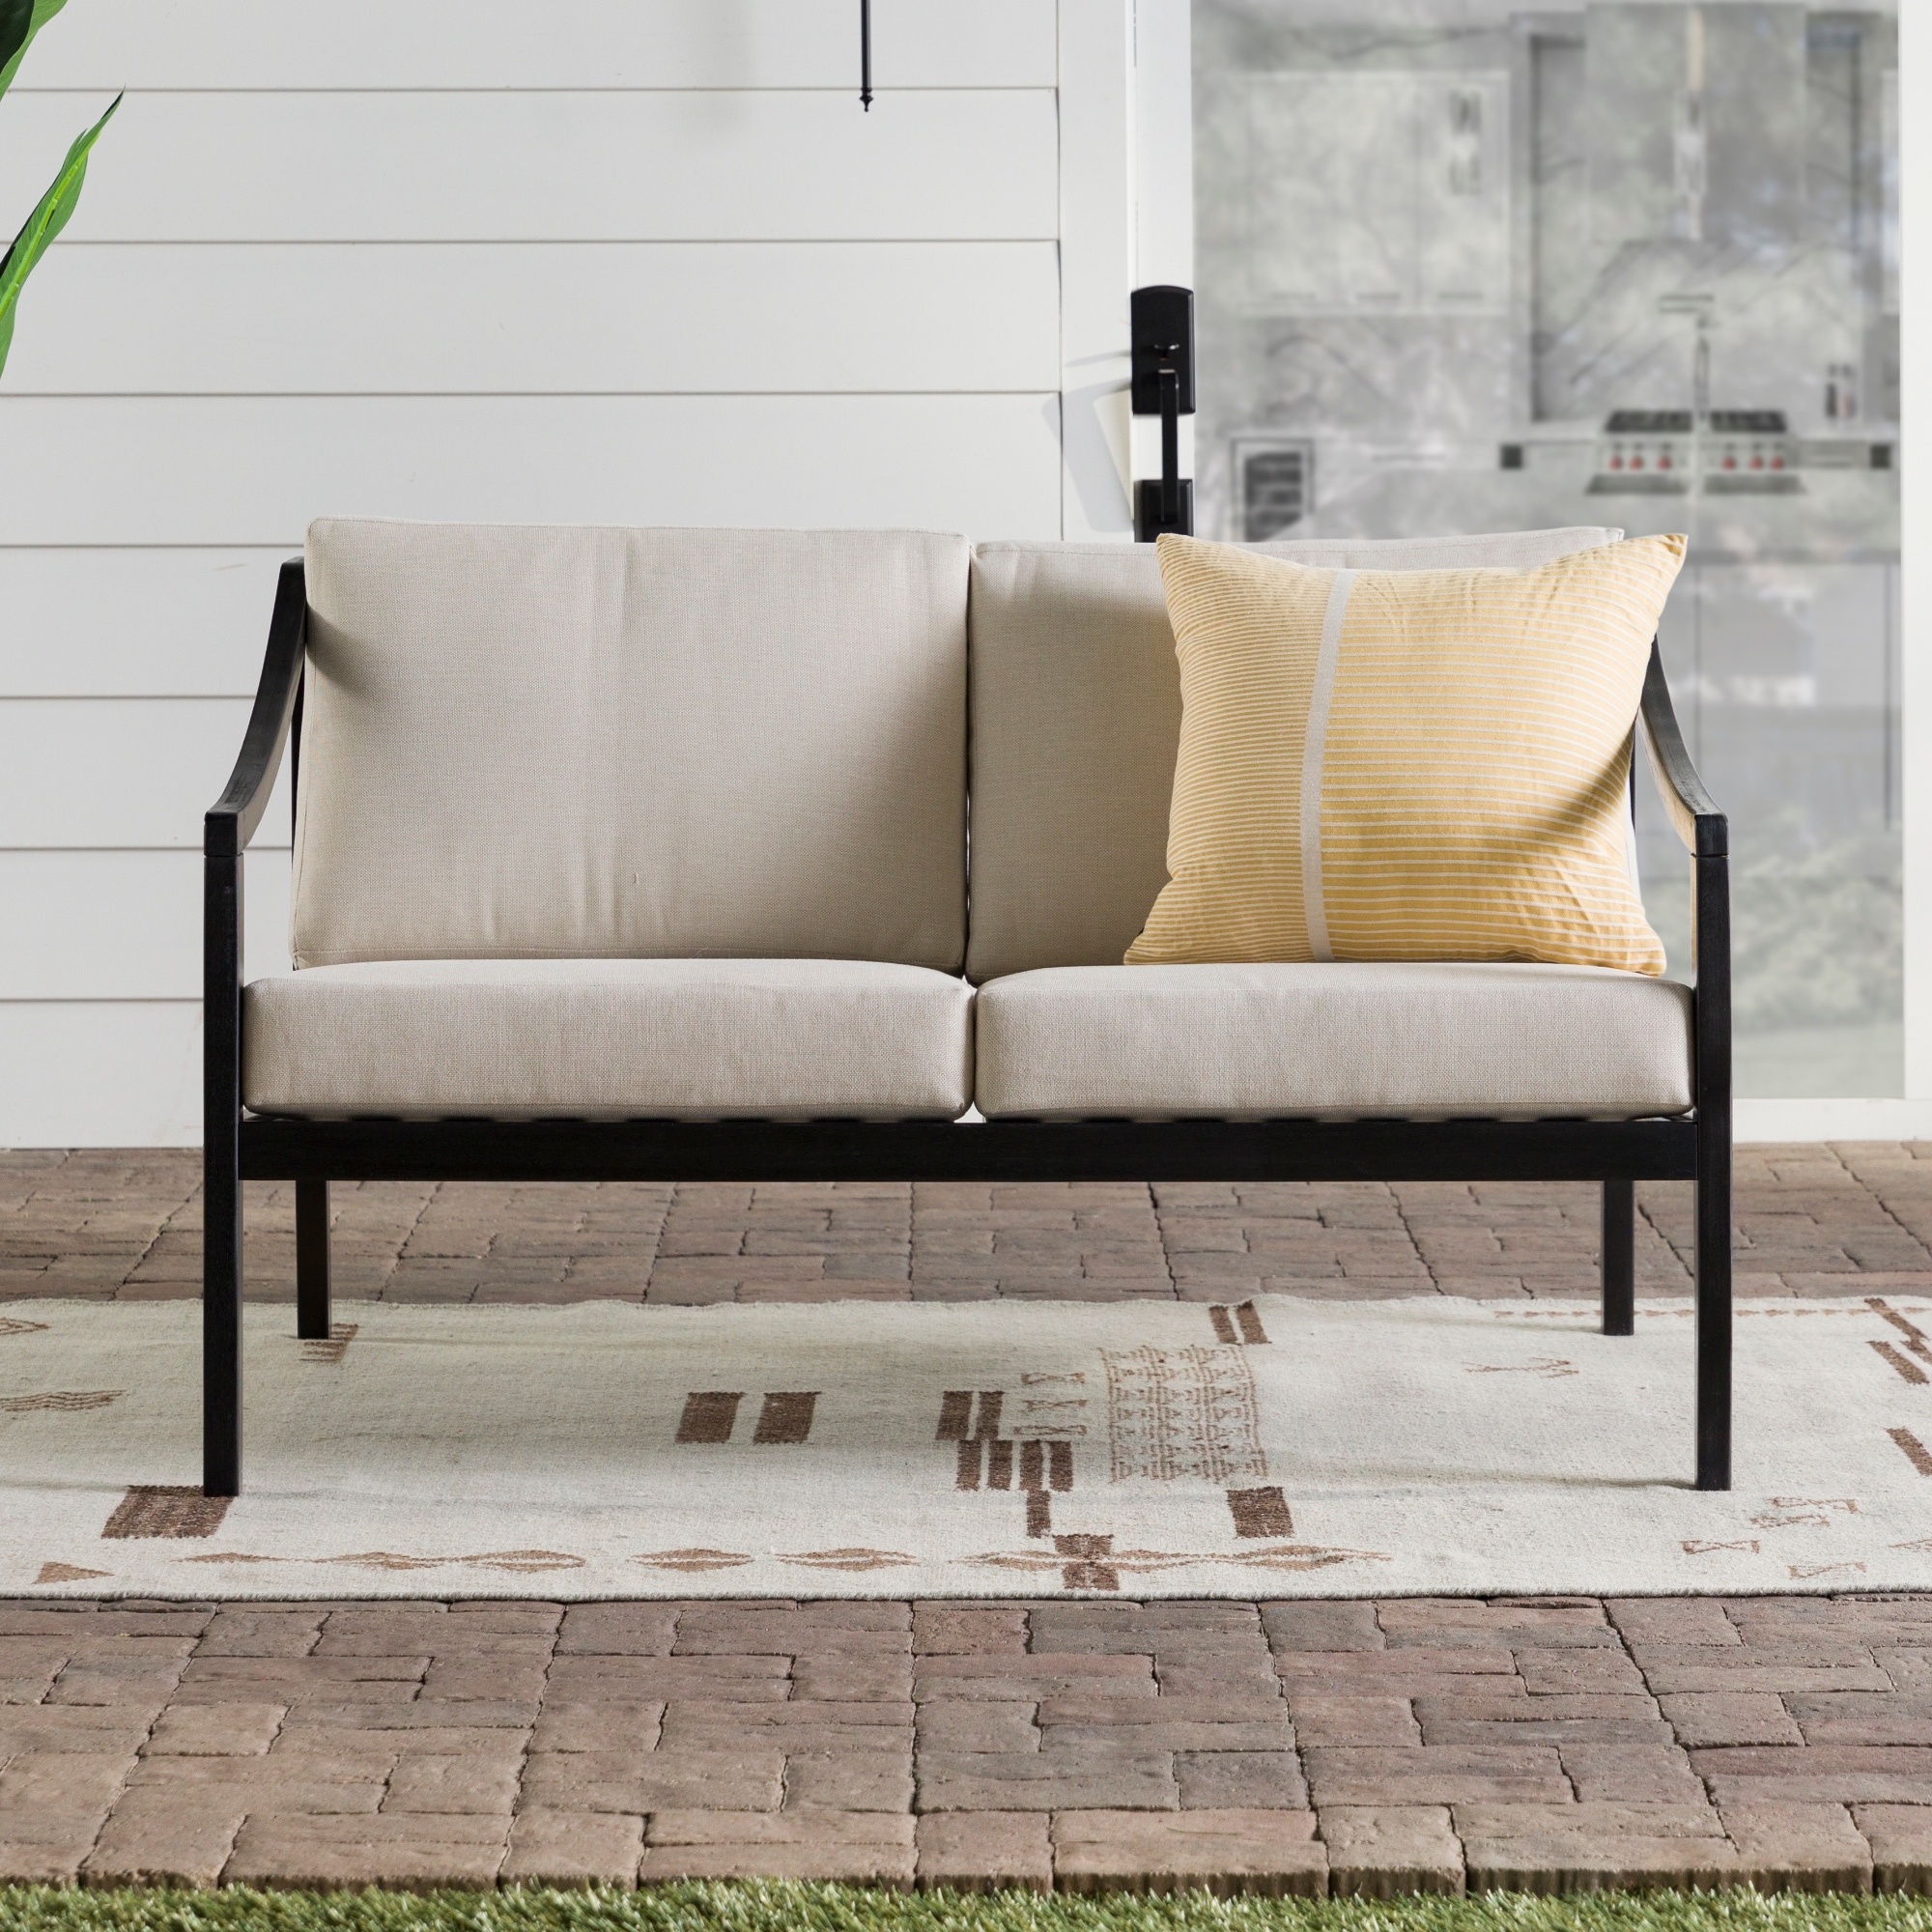 Middlebrook Designs Solid Wood Patio Love Seat